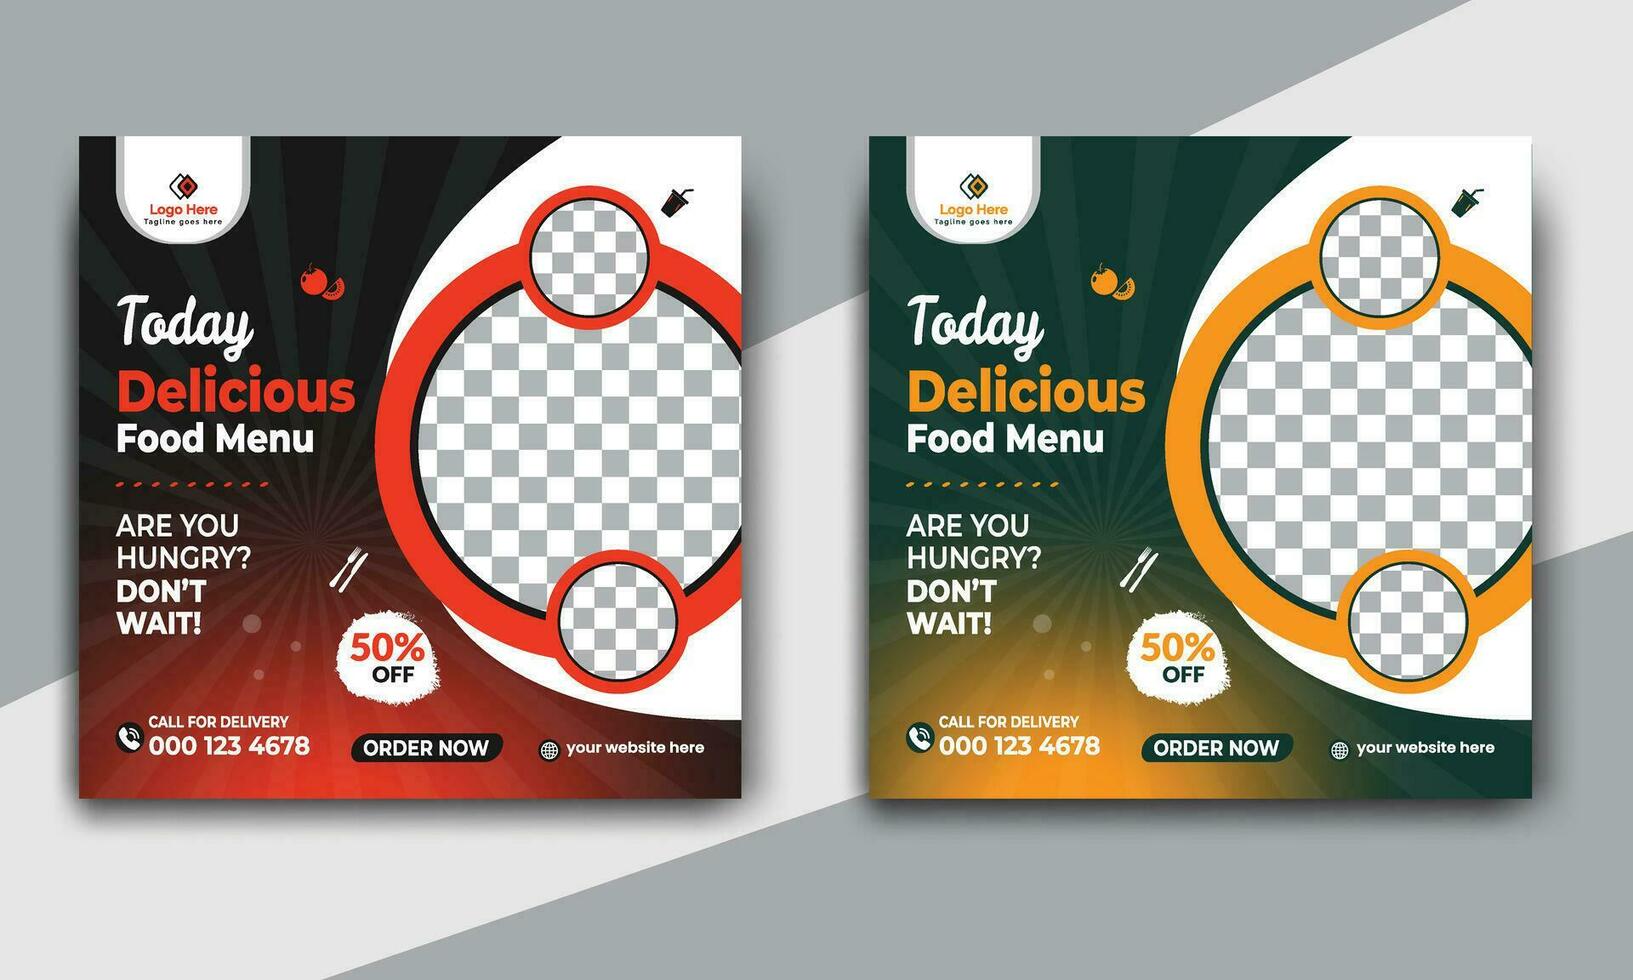 Fast food restaurant business marketing social media post or web banner template design with abstract background. Fresh pizza, burger and online sale promotion flyer or poster design. vector